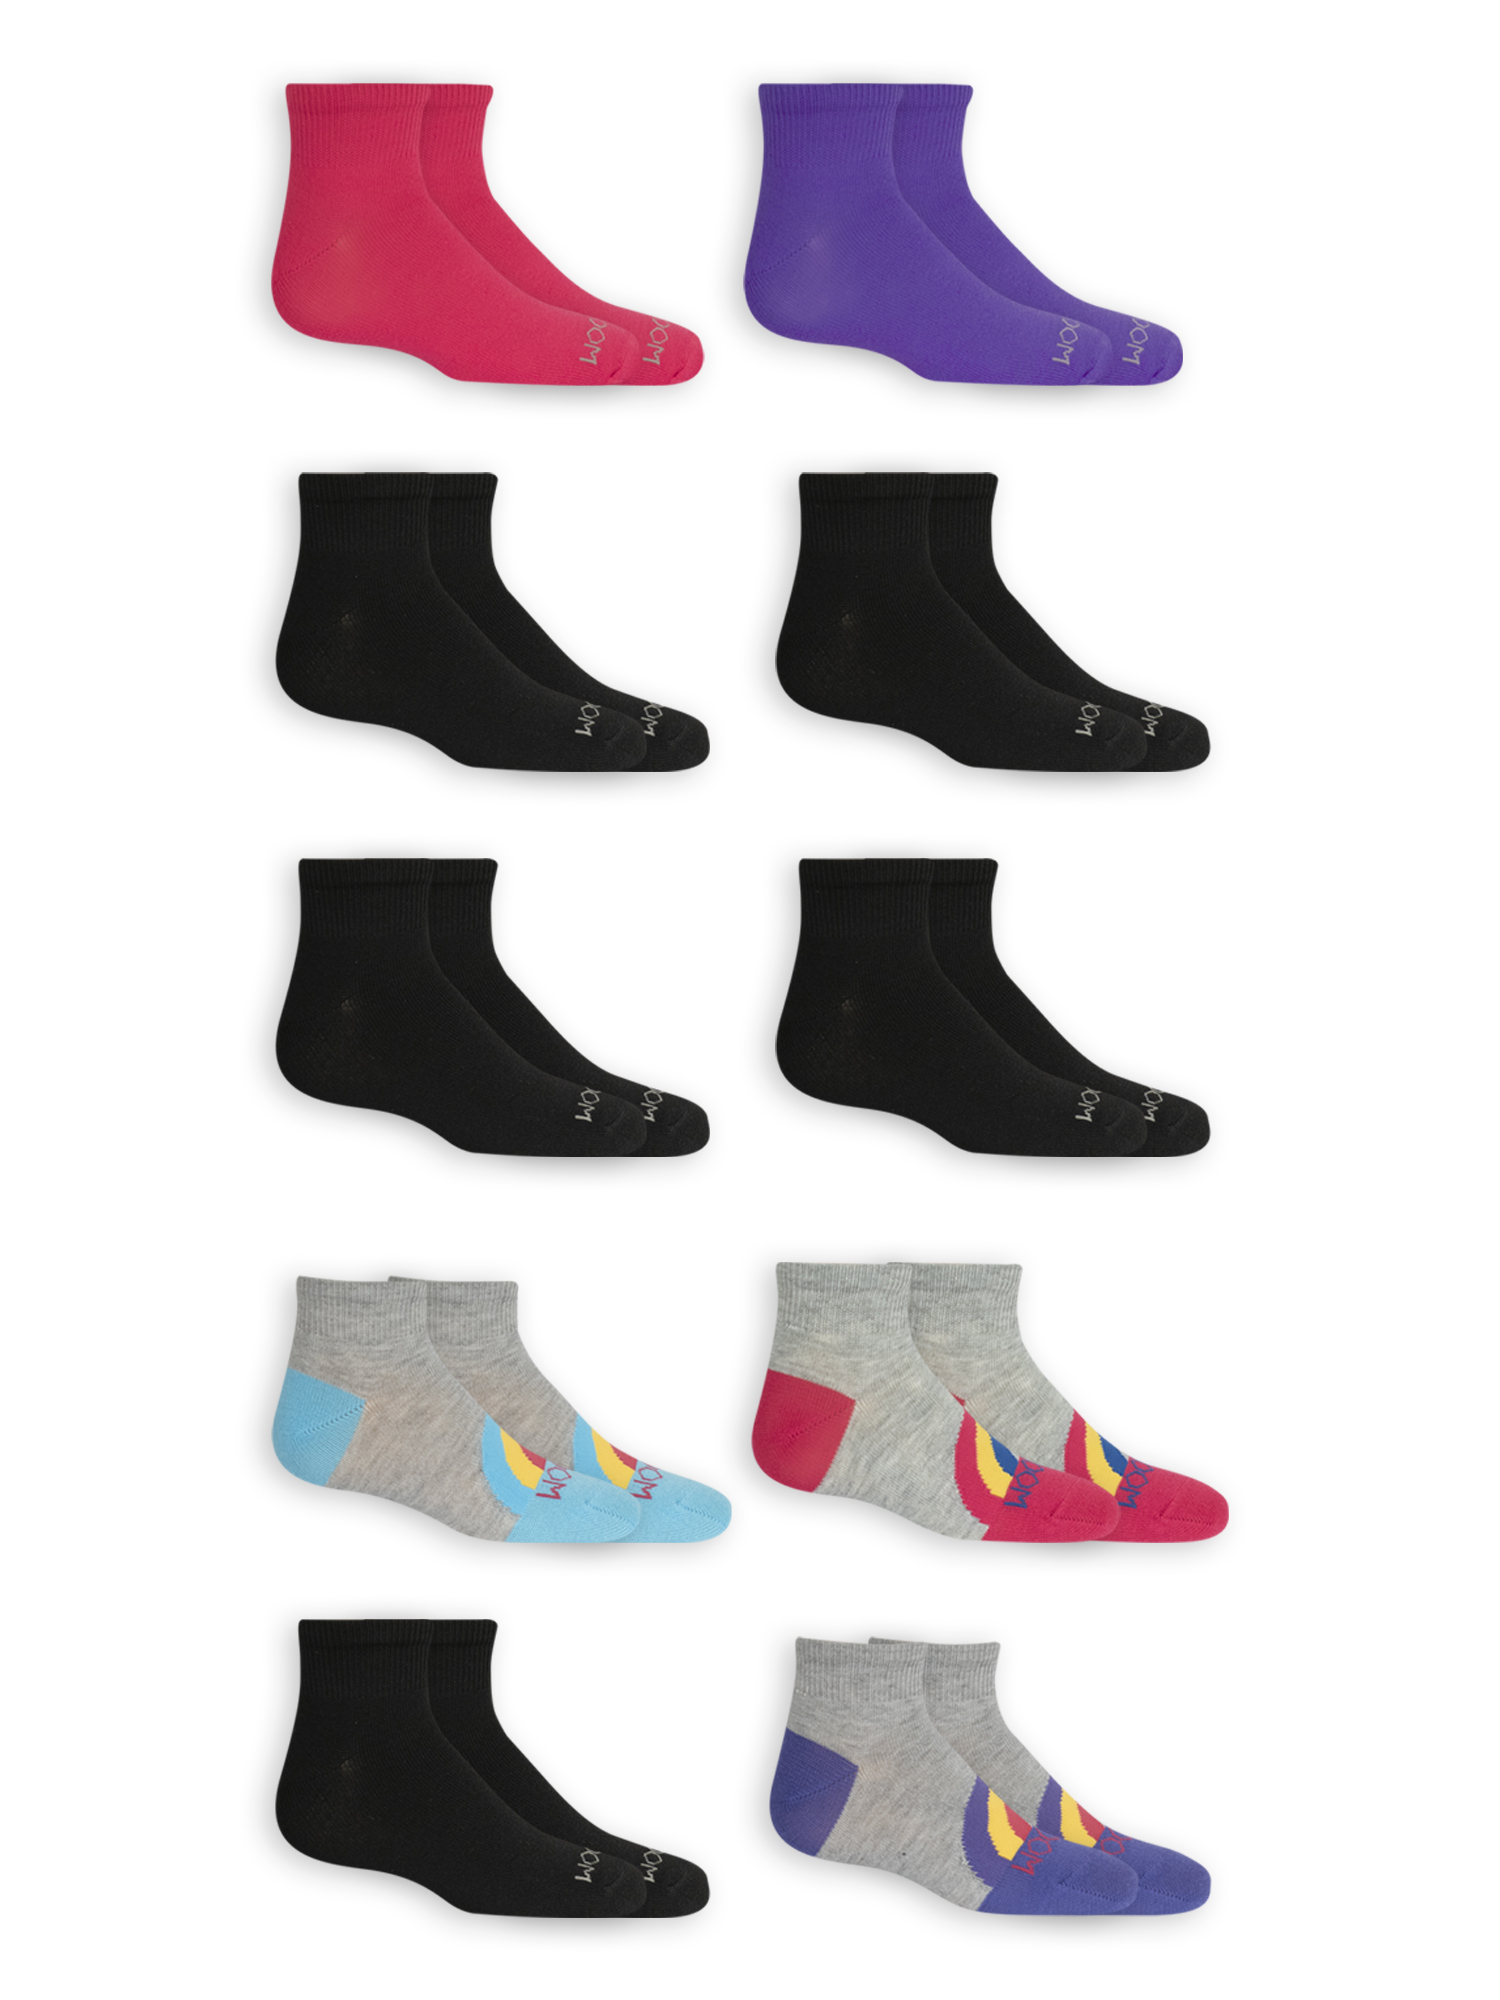 Fruit of the Loom Casual Socks (Big Girls or Little Girls), 10 Pack - image 1 of 4